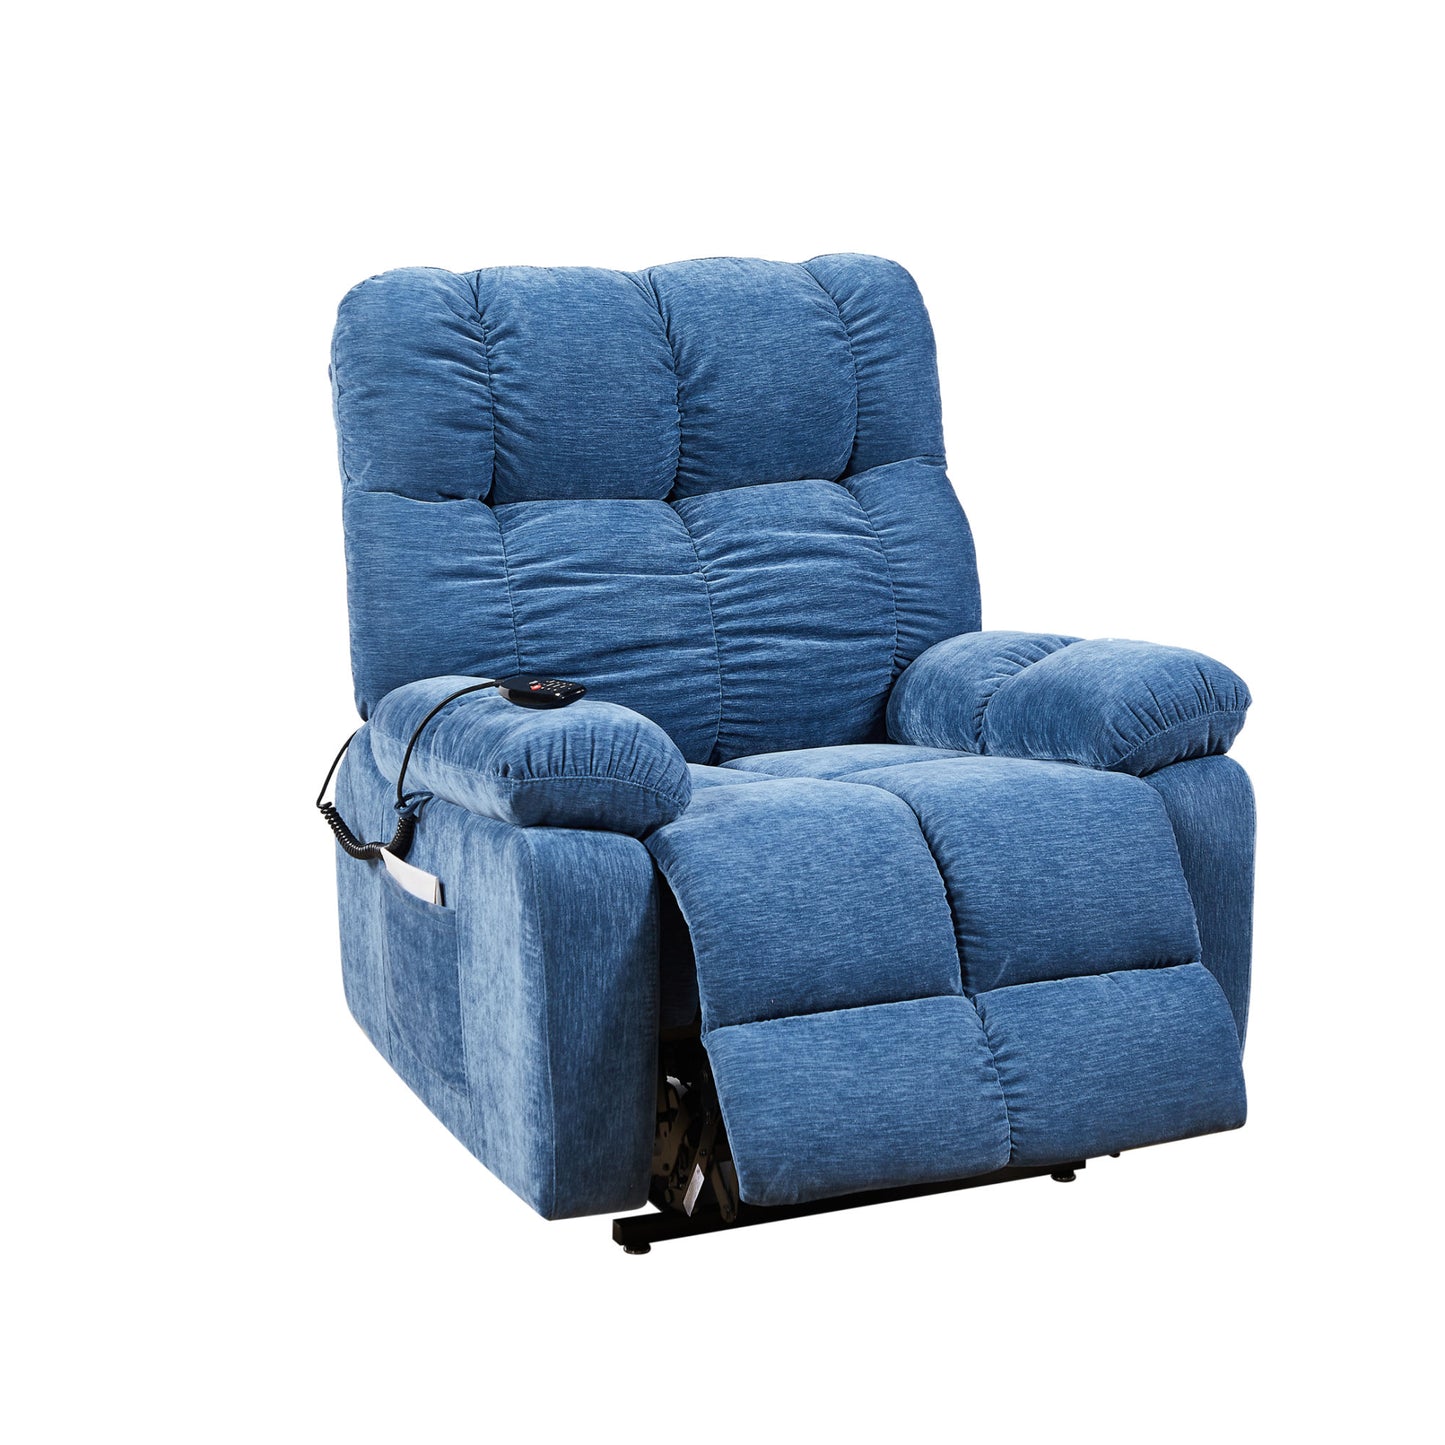 Liyasi Electric Power Lift Recliner Chair with Airbag Massage and Heating for Elderly, 3 Positions, 2 Side Pockets, USB Charge Ports, High-end Quality Cloth Power Reclining Chair